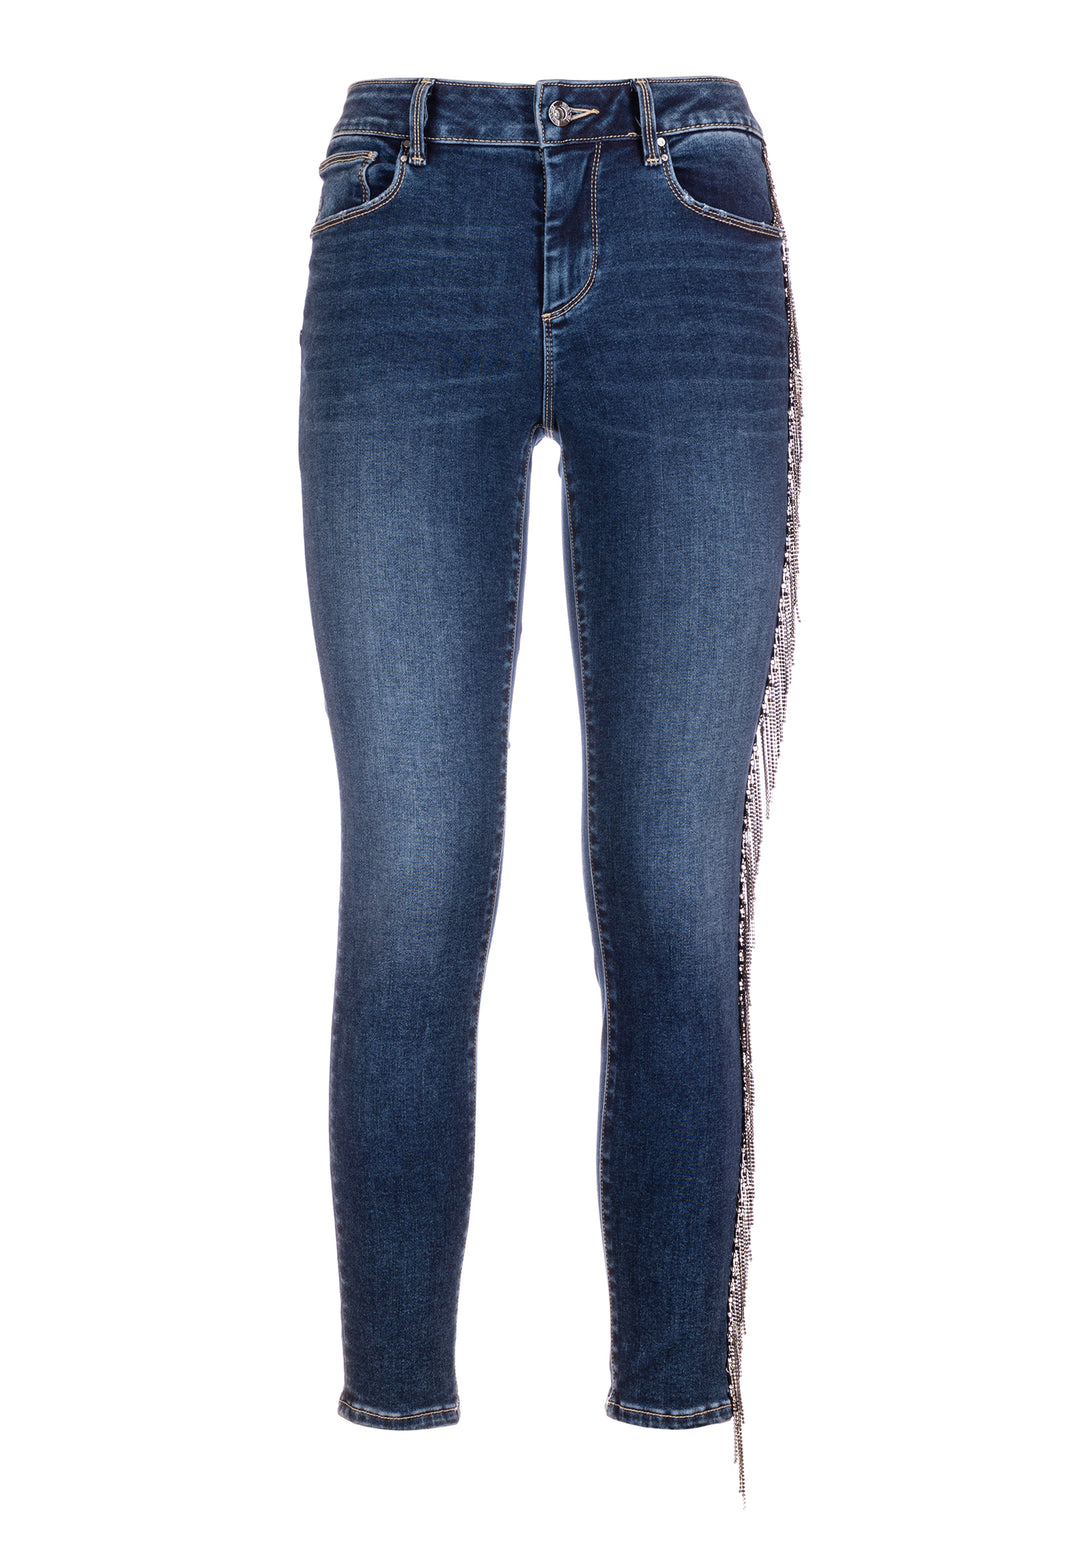 Jeans slim fit with push up effect made in denim with middle wash